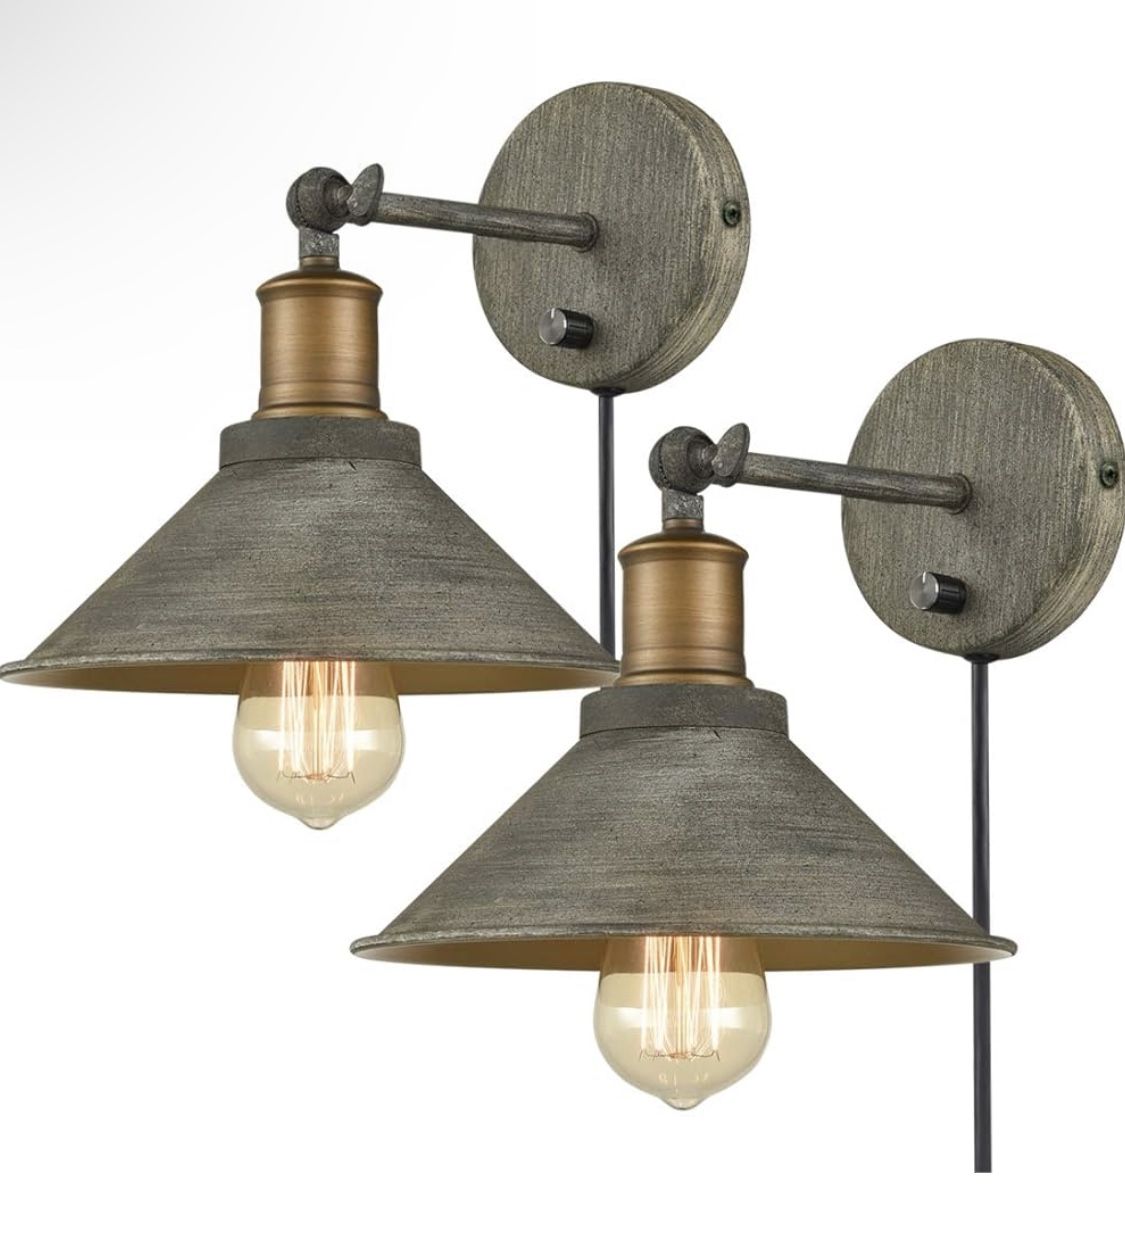 Vintage Farmhouse Wall Sconces Hardwired or Plug-in 